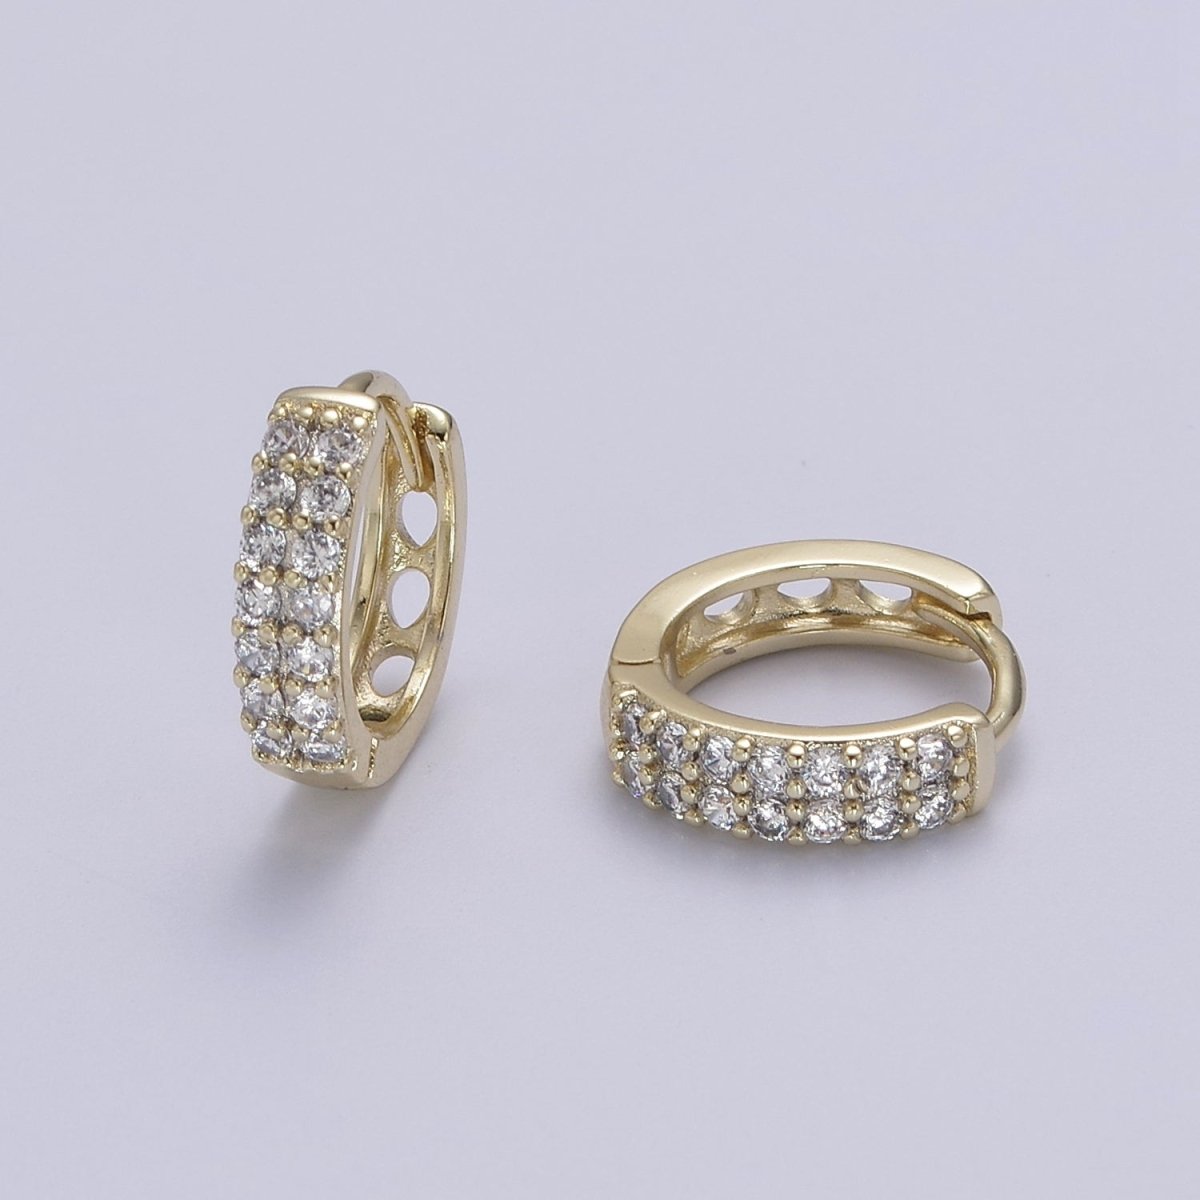 OS Double Pave Gold Huggie Earrings, Thick Huggie 2 Lines CZ Diamond Hoop Earrings V-150 - DLUXCA